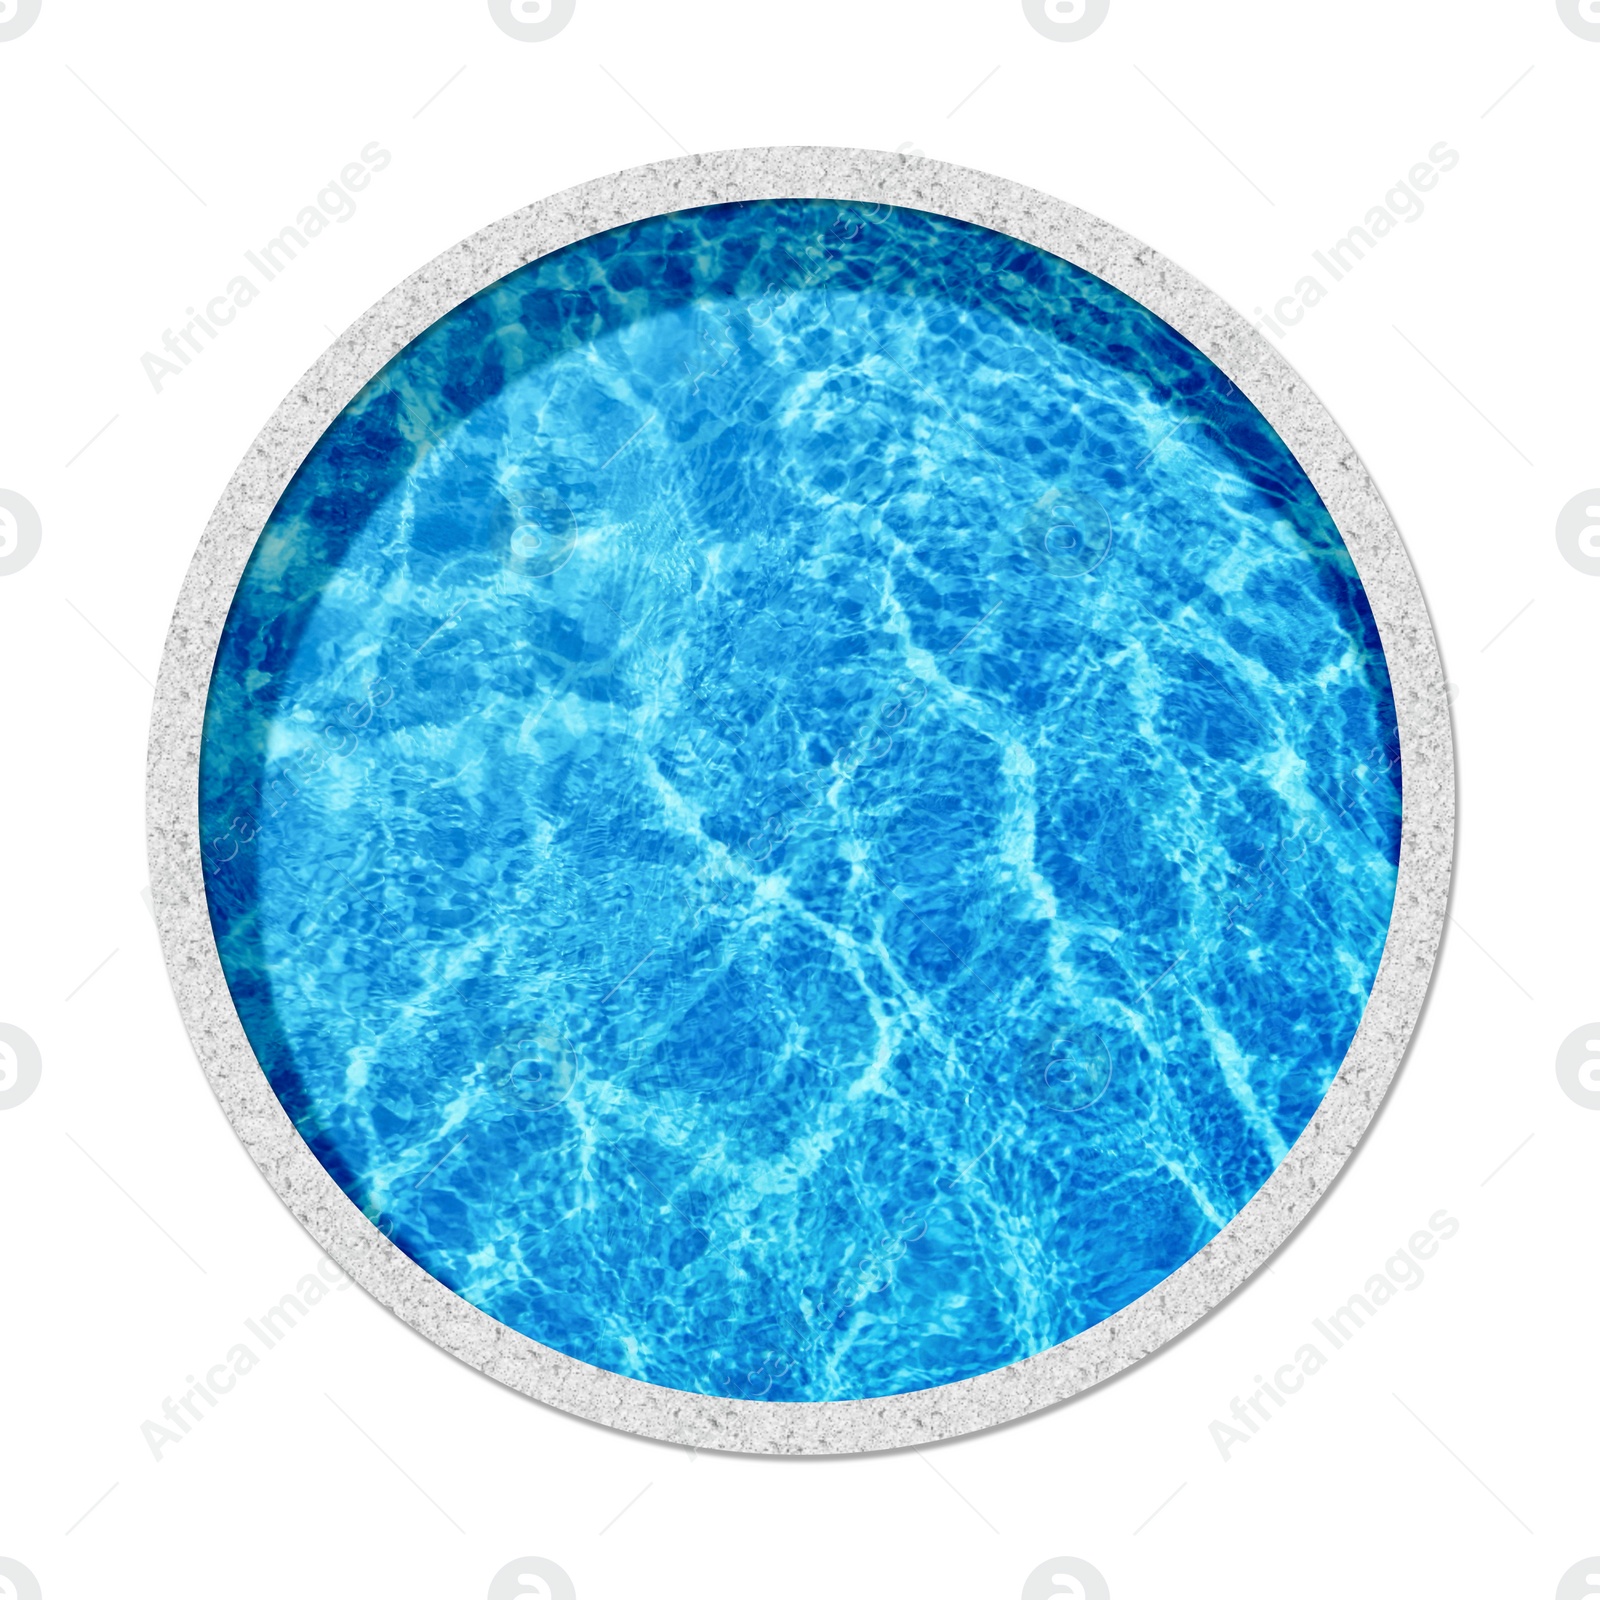 Image of Round swimming pool on white background, top view